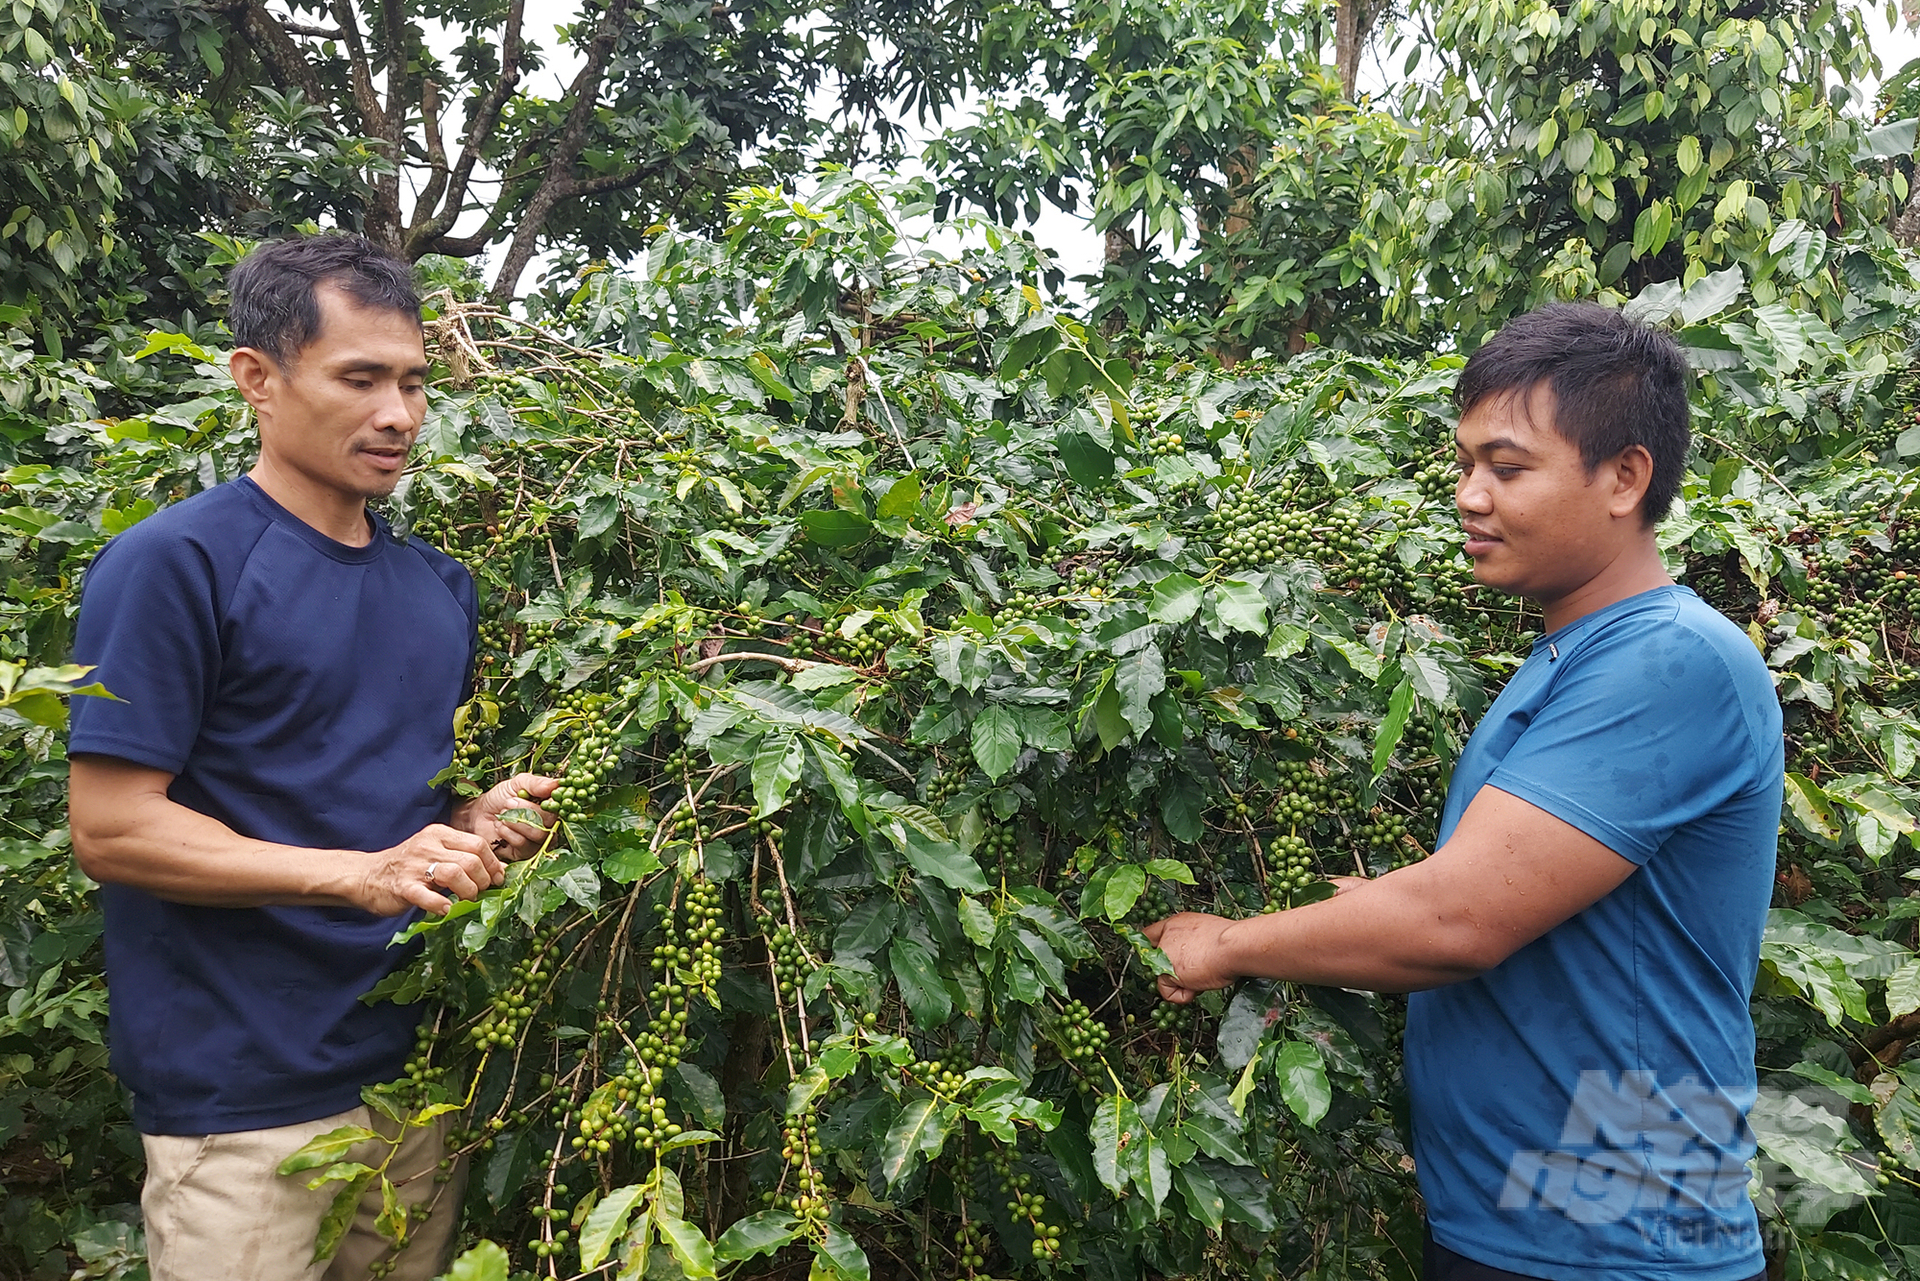 Quang Tri province currently has over 3,900 hectares of coffee production area. Photo: Vo Dung.